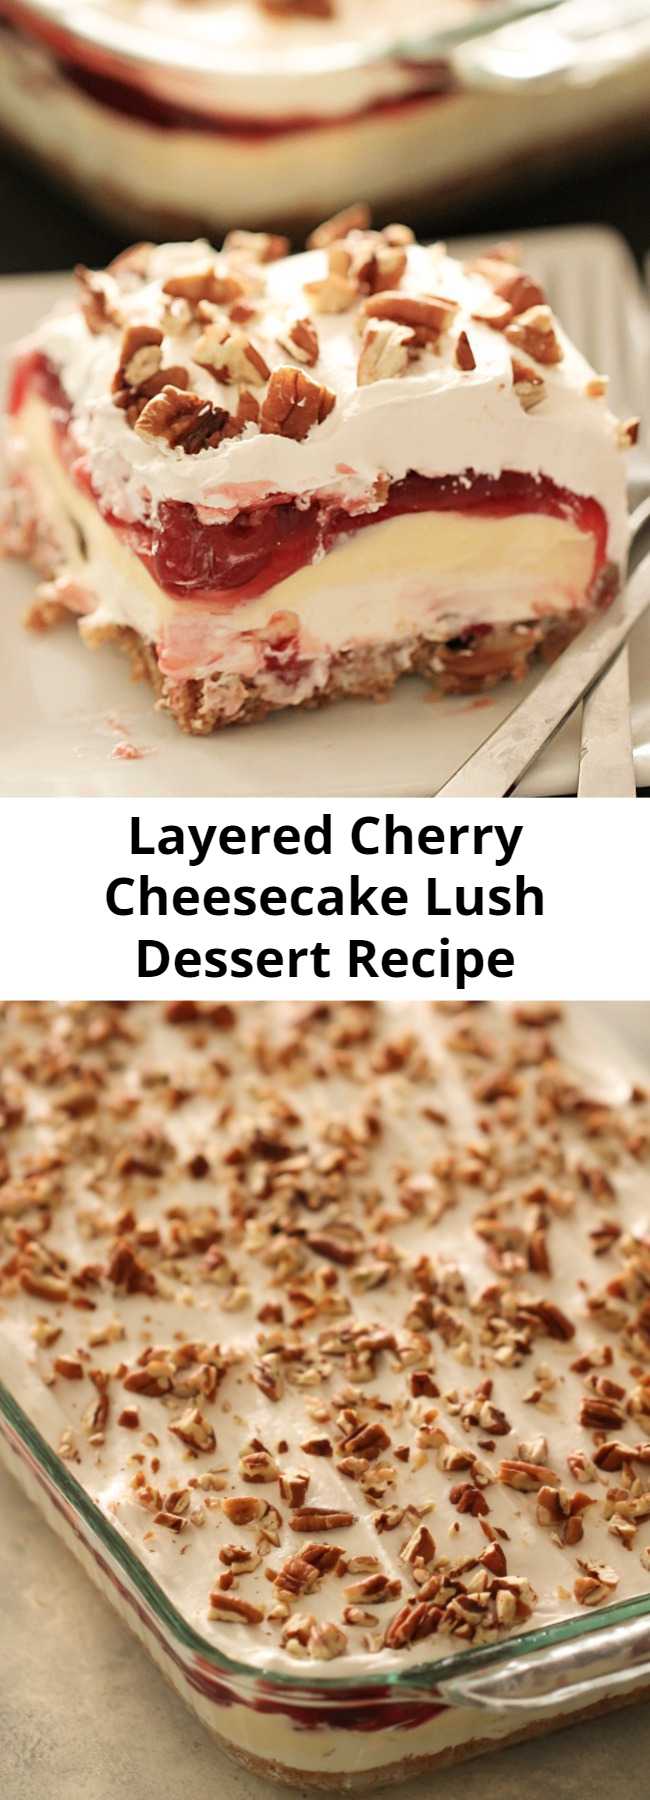 Layered Cherry Cheesecake Lush Dessert Recipe - Get ready to enjoy the best, cherry cream cheese lush dessert you have ever tasted. This mind-blowing layered cherry cheesecake will have you coming back for more and friends asking for the recipe!